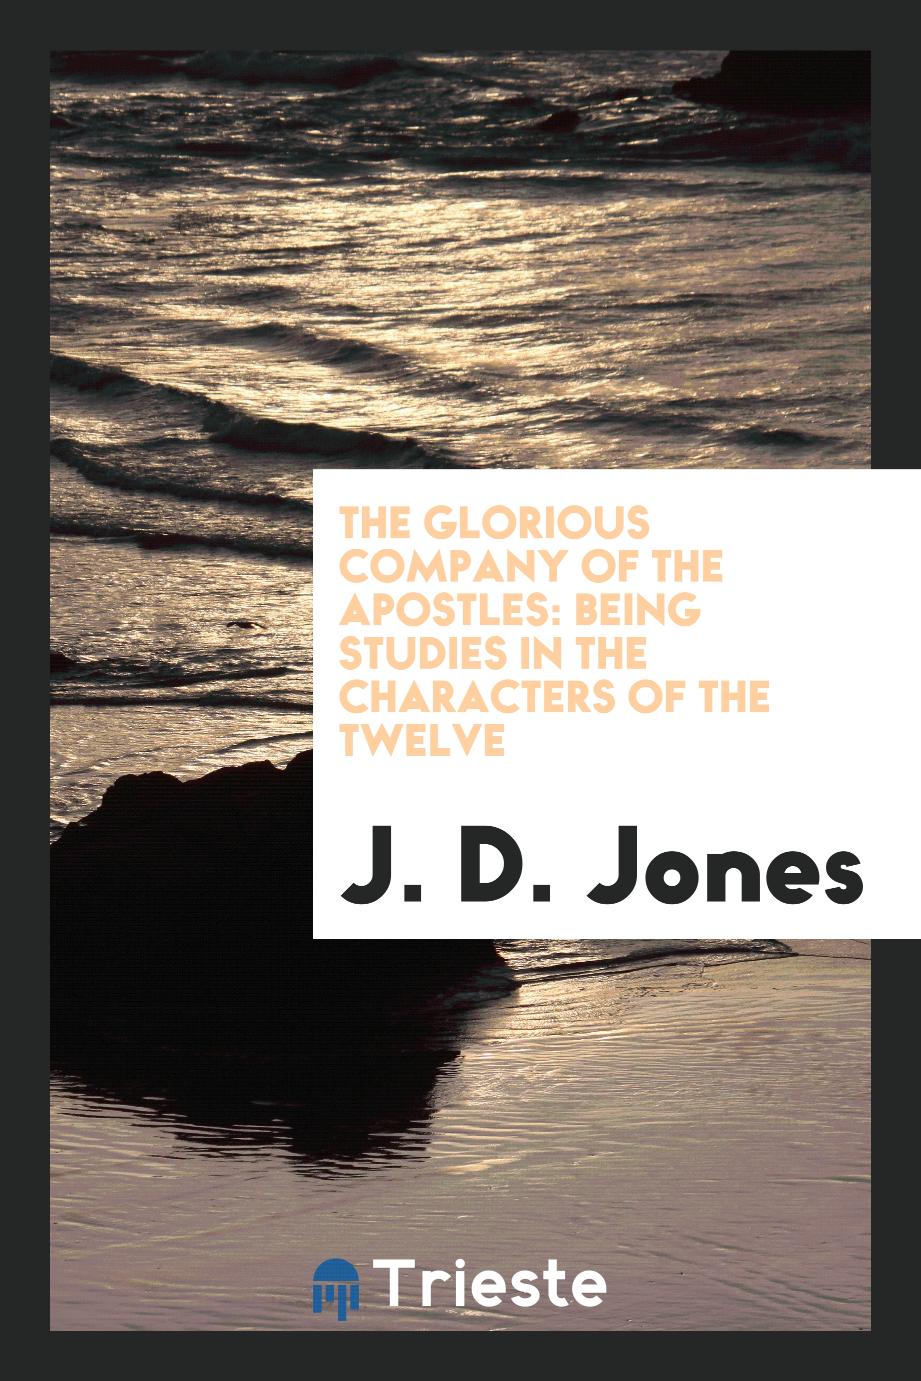 The glorious company of the Apostles: being studies in the characters of the twelve